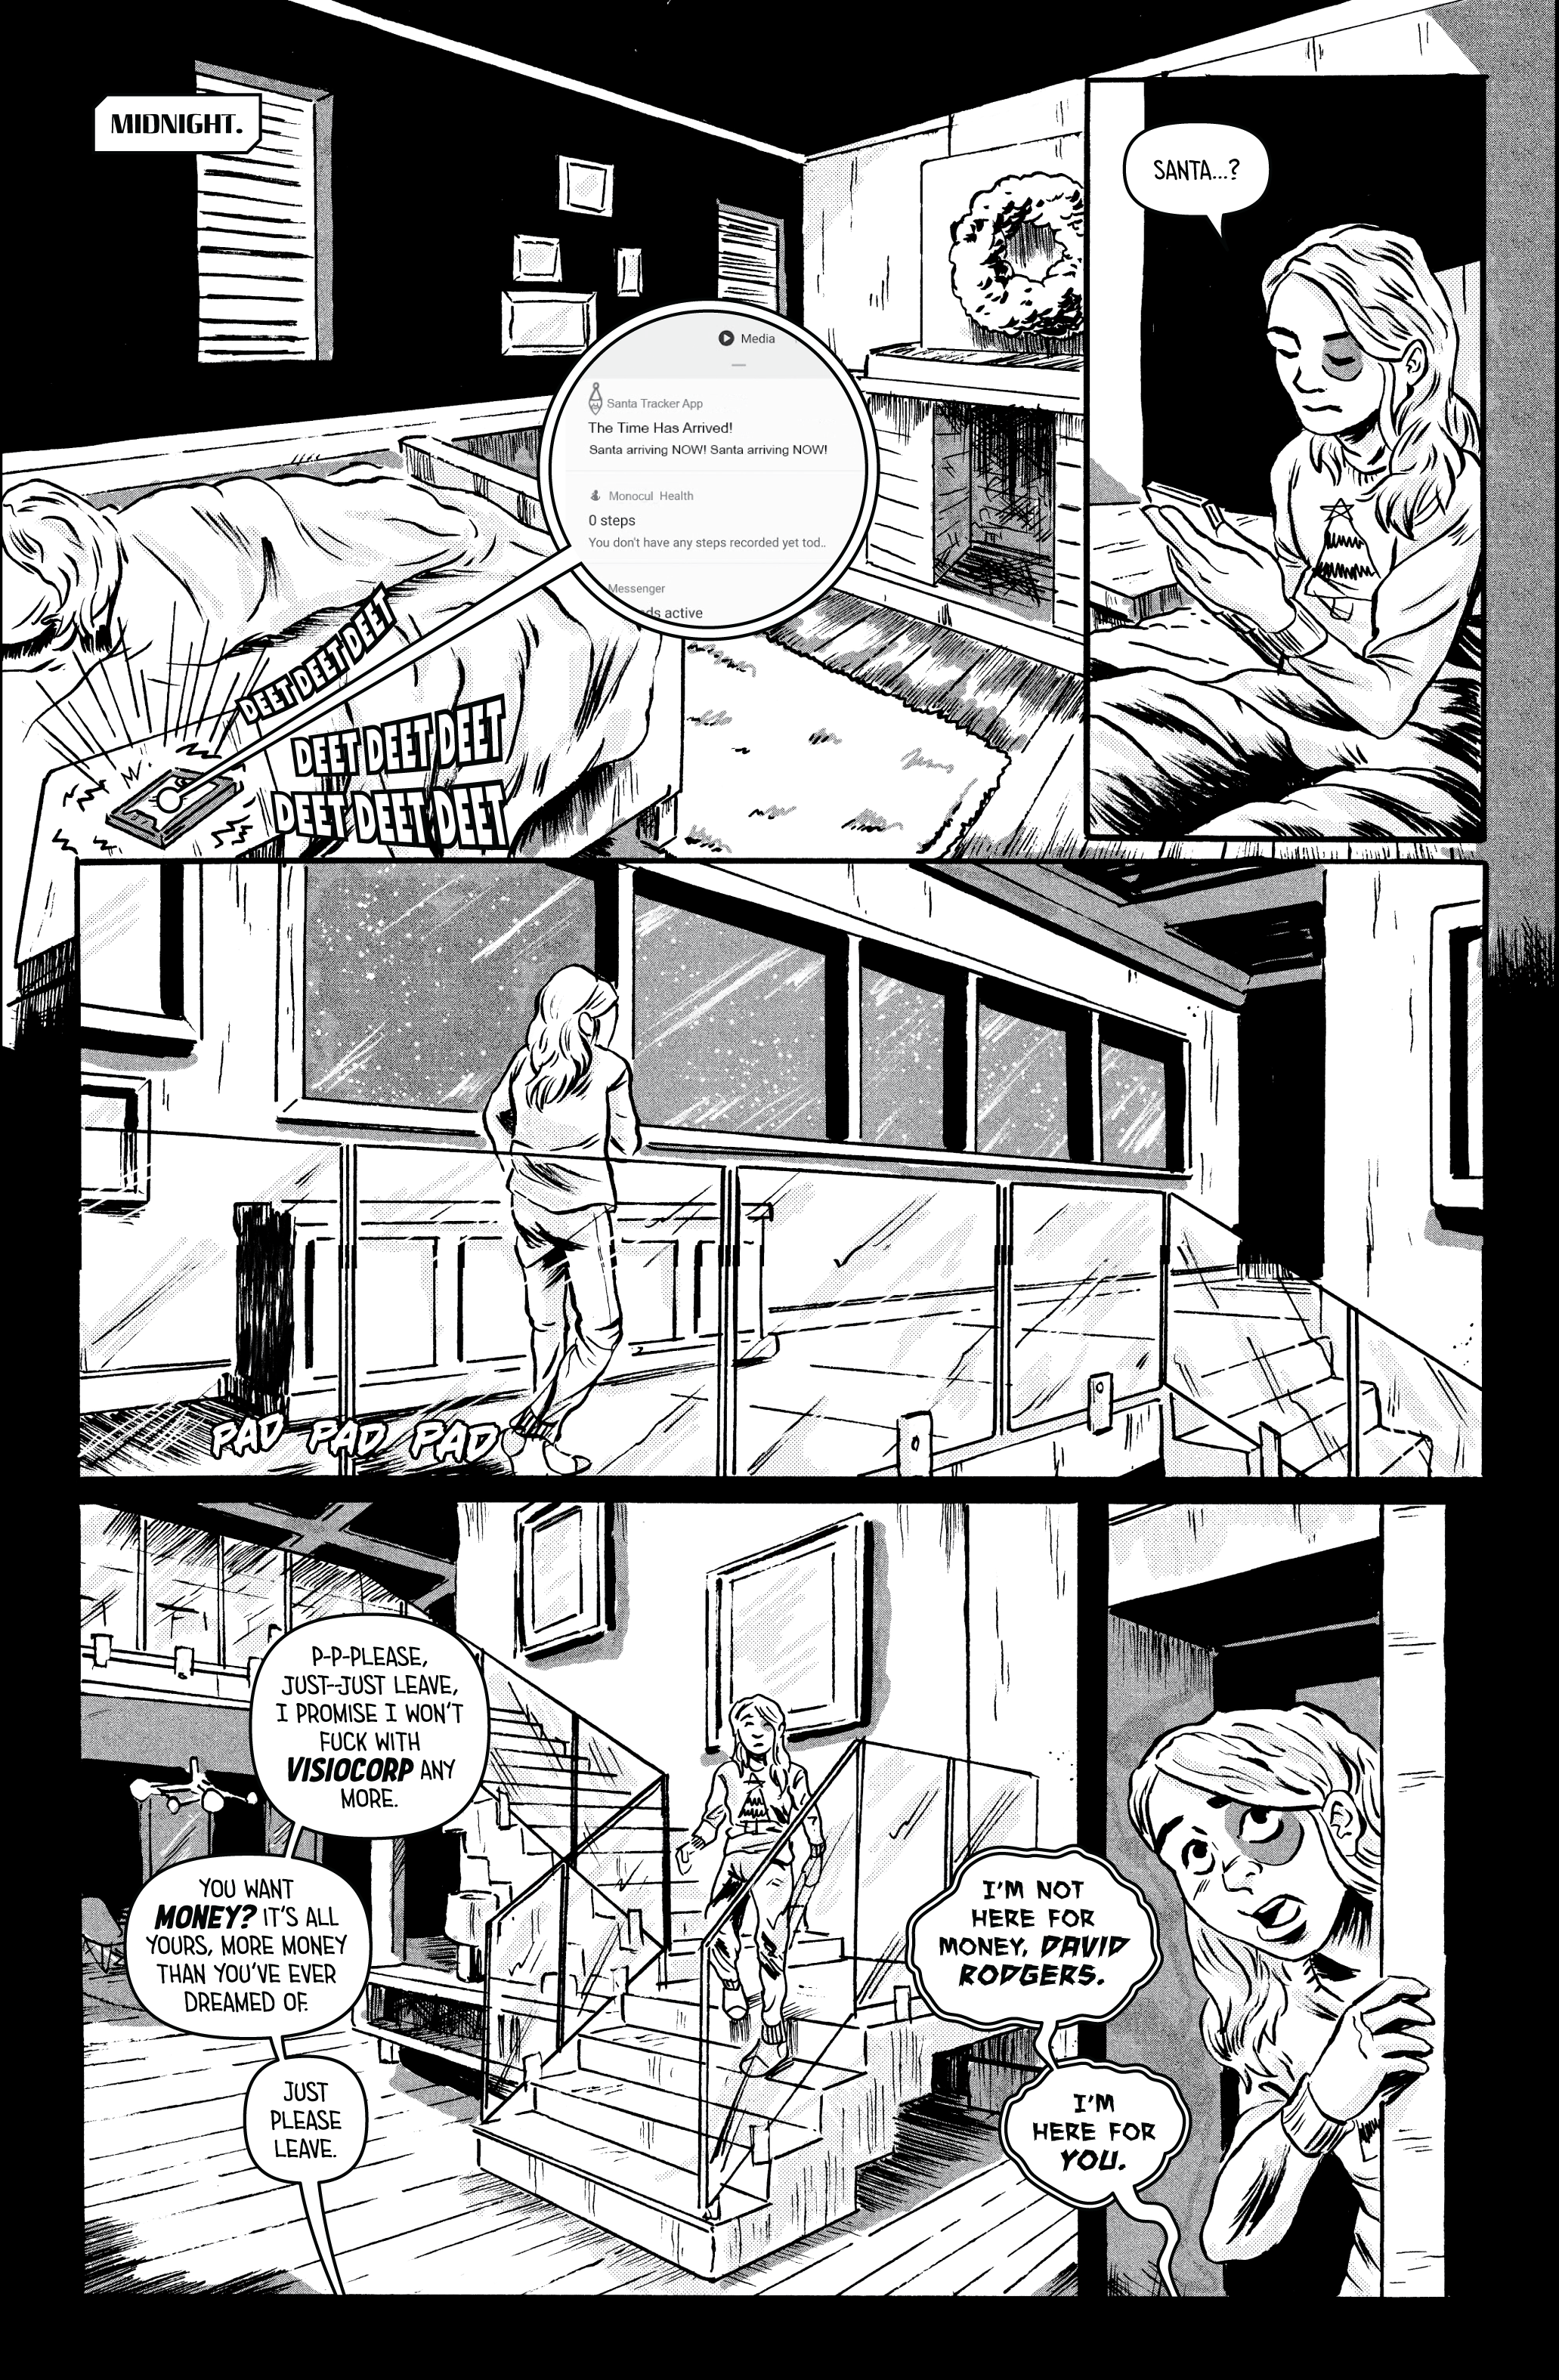 Monocul issue 06 story 01 pg 04 - Corporate Krampus-01.png